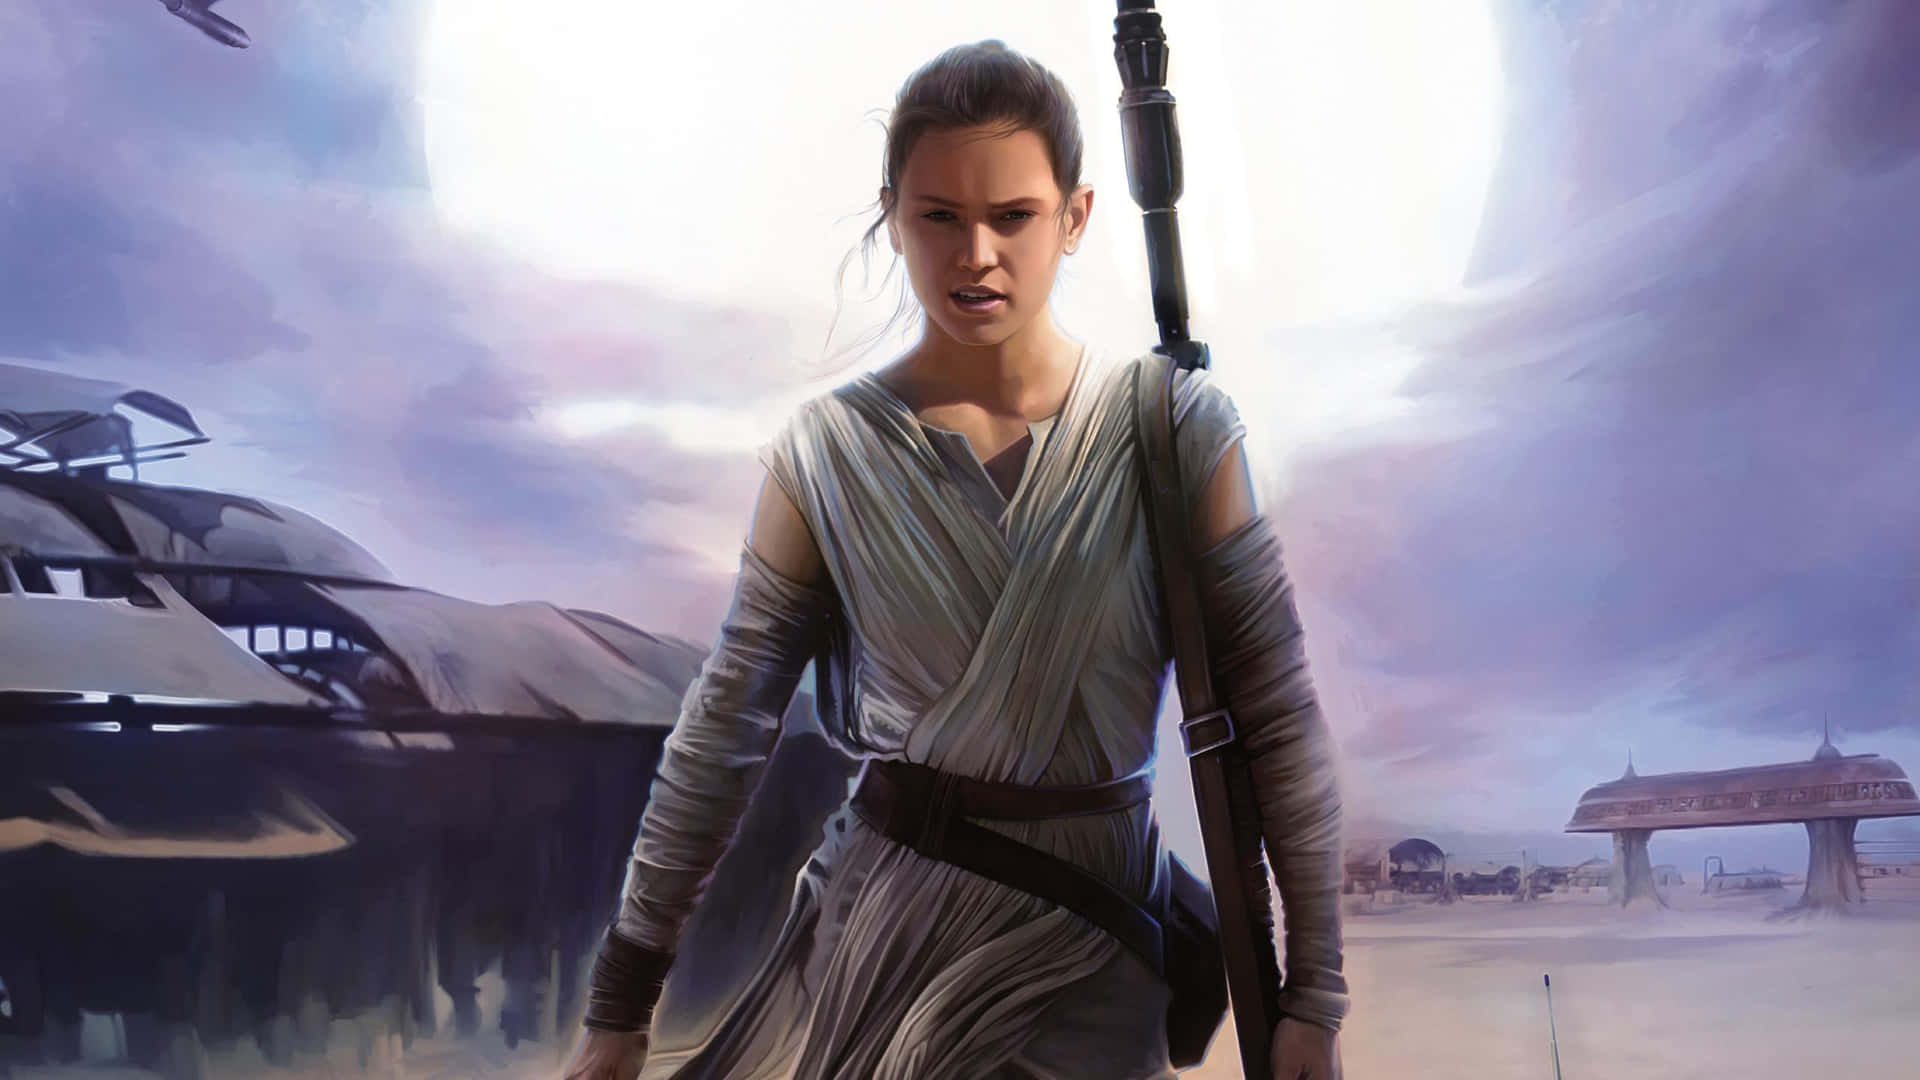 Rey, with Lightsaber in Hand, Prepares to Take on the Dark Side Wallpaper